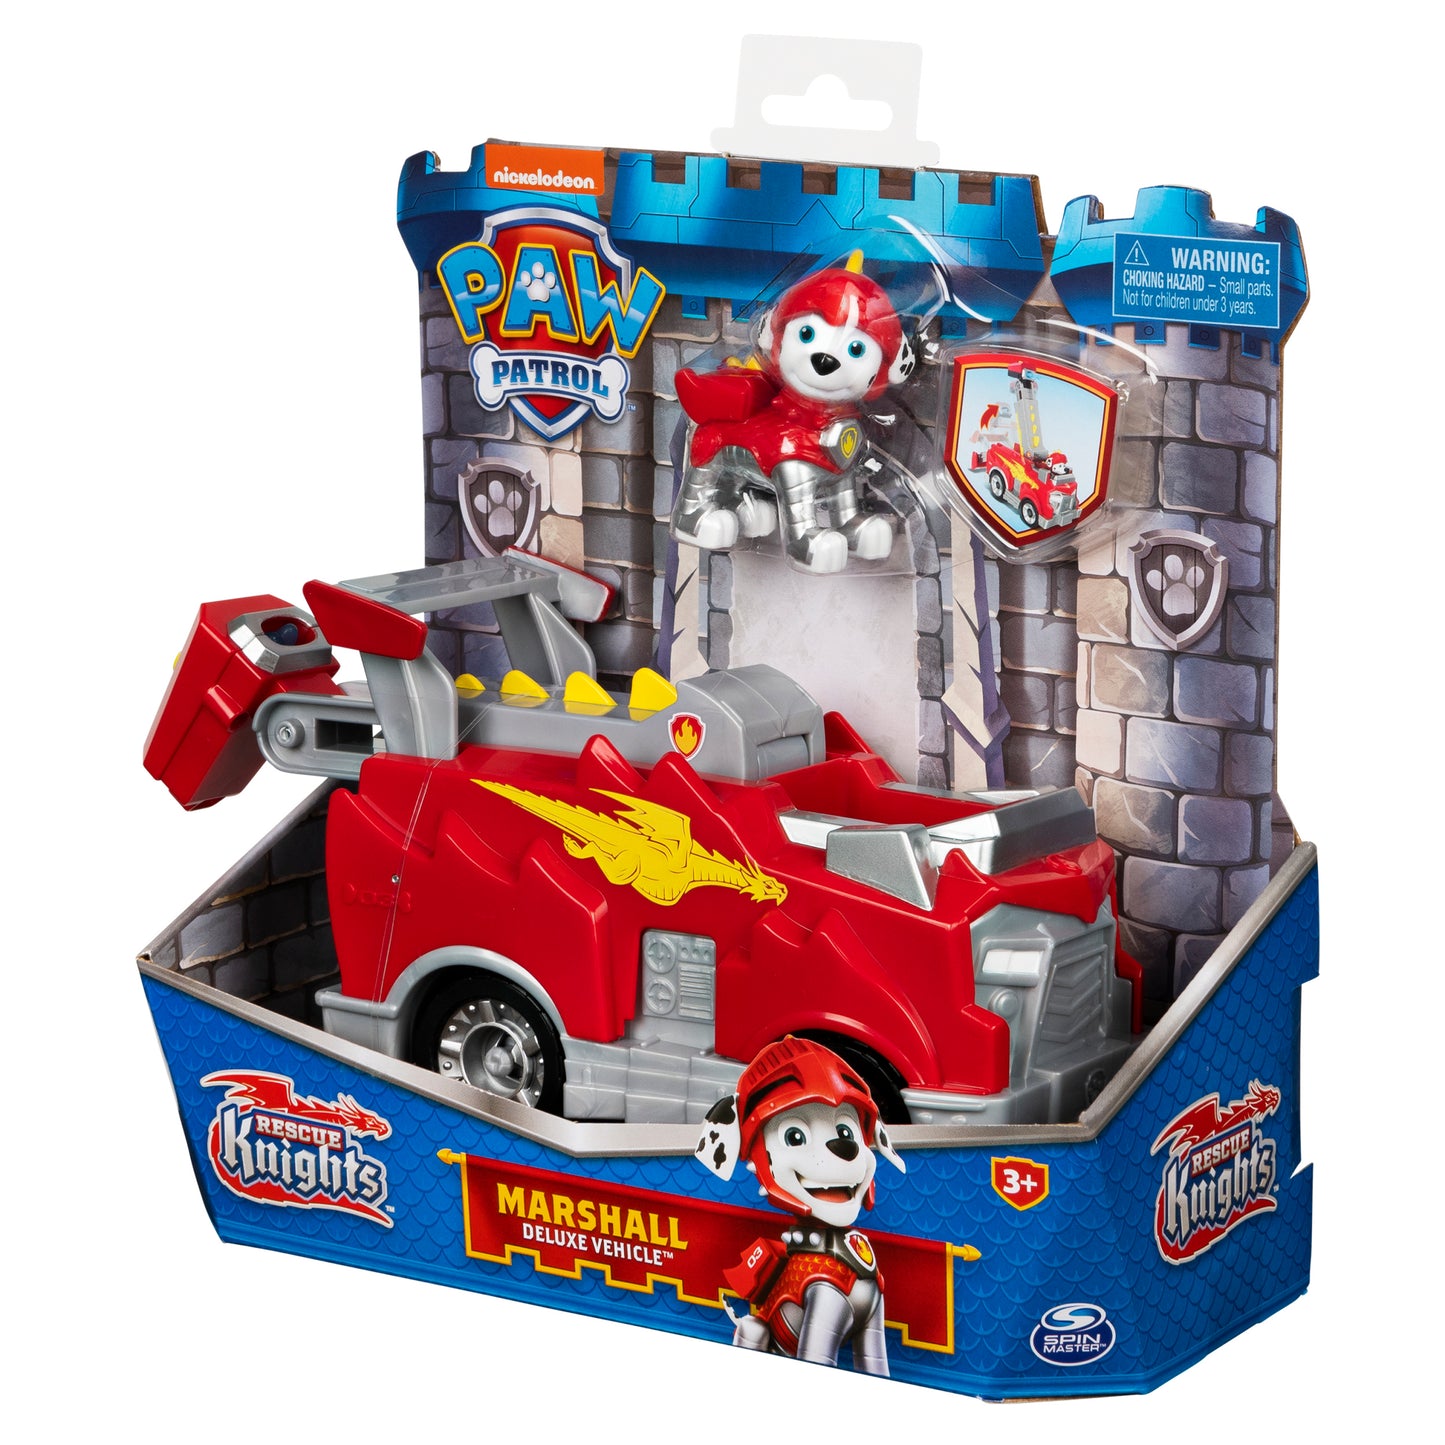 PAW Patrol, Rescue Knights Marshall Transforming Toy Car with Collectible Action Figure, Kids Toys for Ages 3 and up